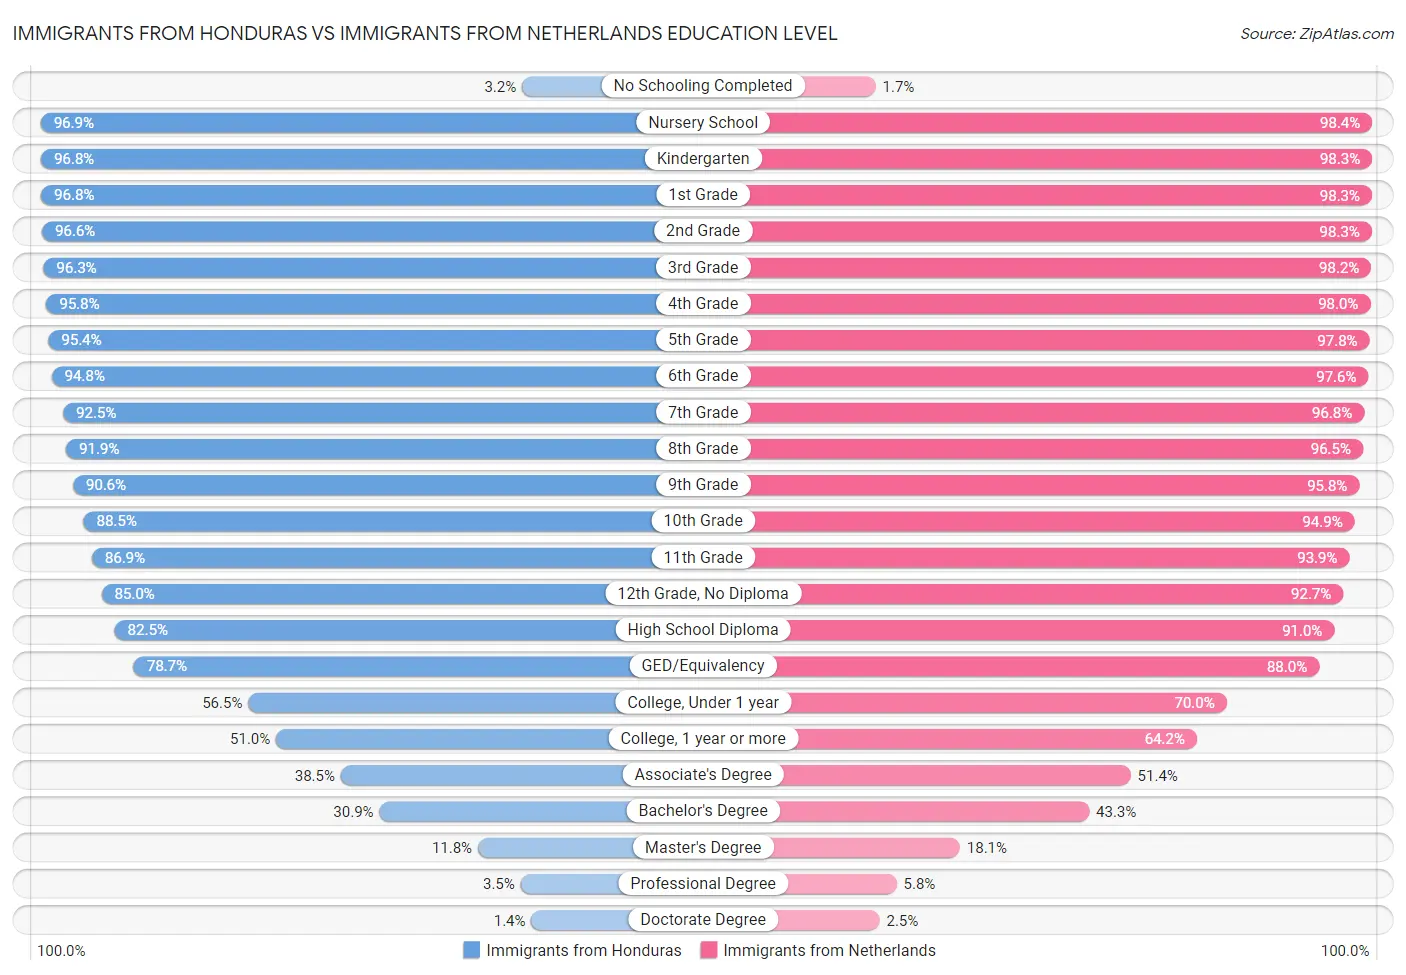 Immigrants from Honduras vs Immigrants from Netherlands Education Level